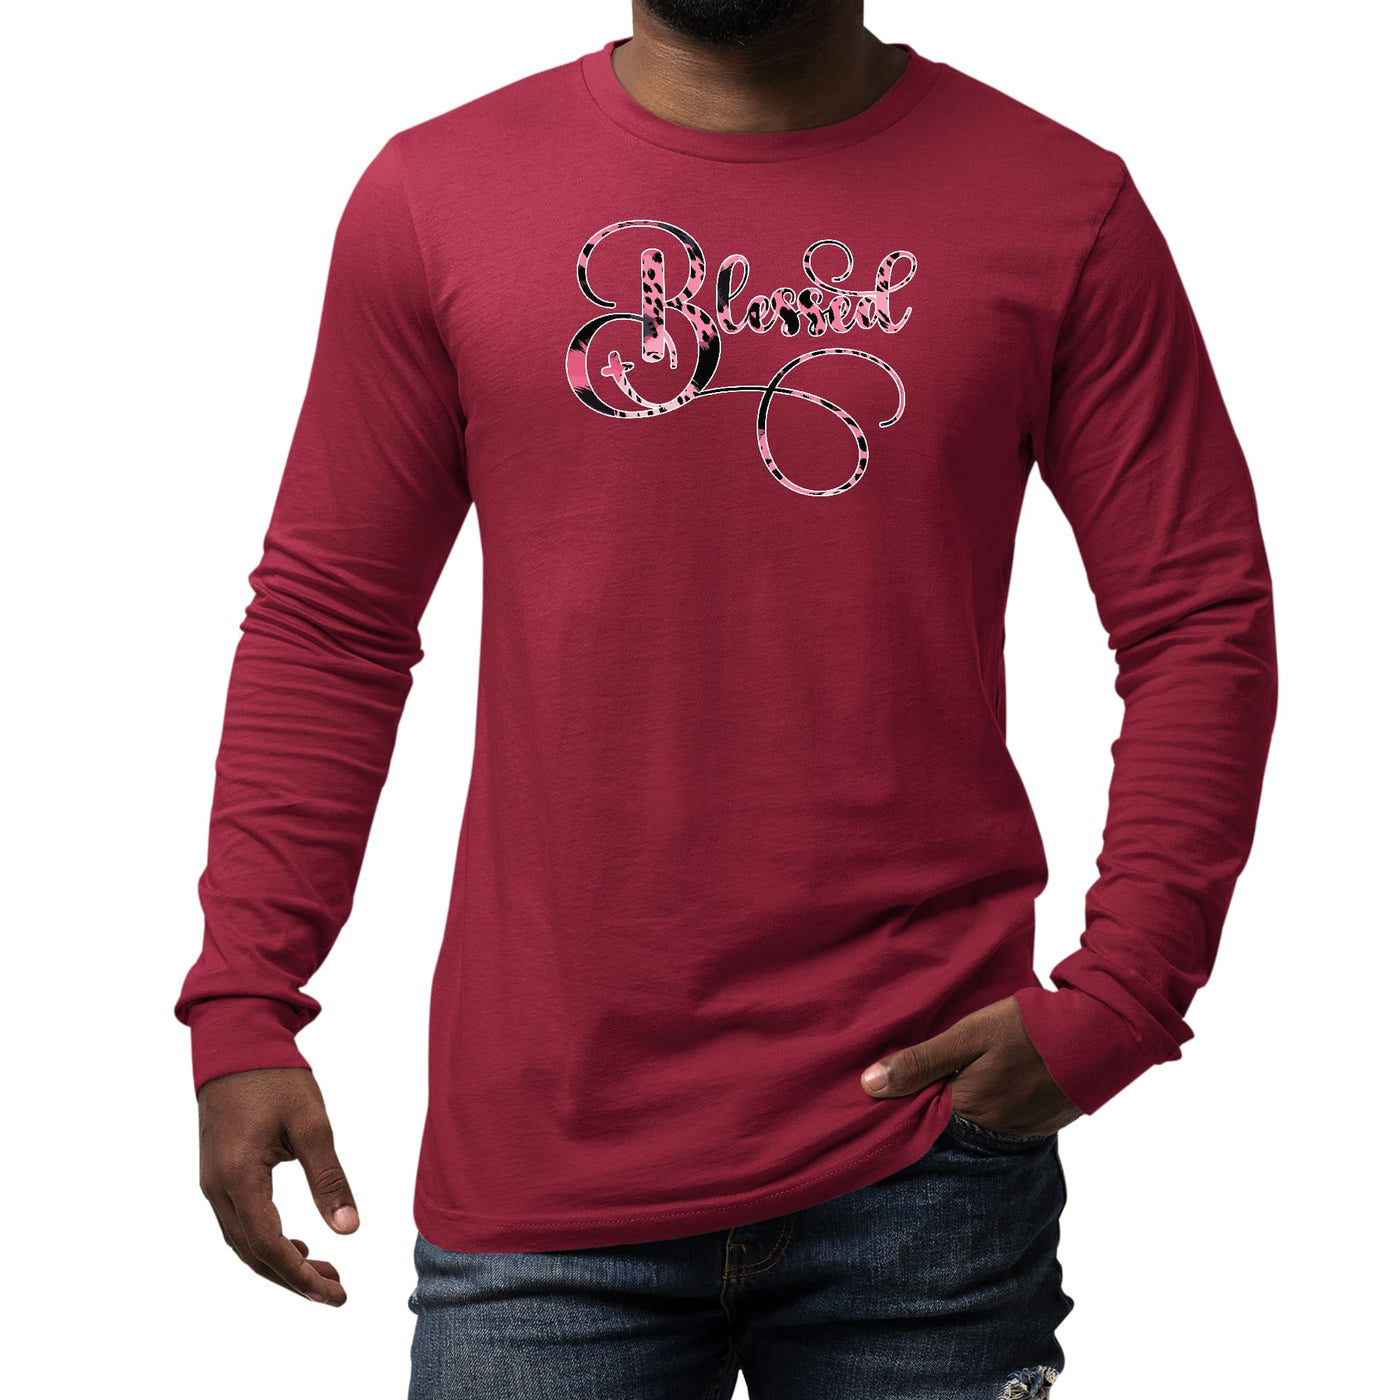 Long Sleeve Graphic T-shirt - Blessed Pink And Black Patterned - Unisex